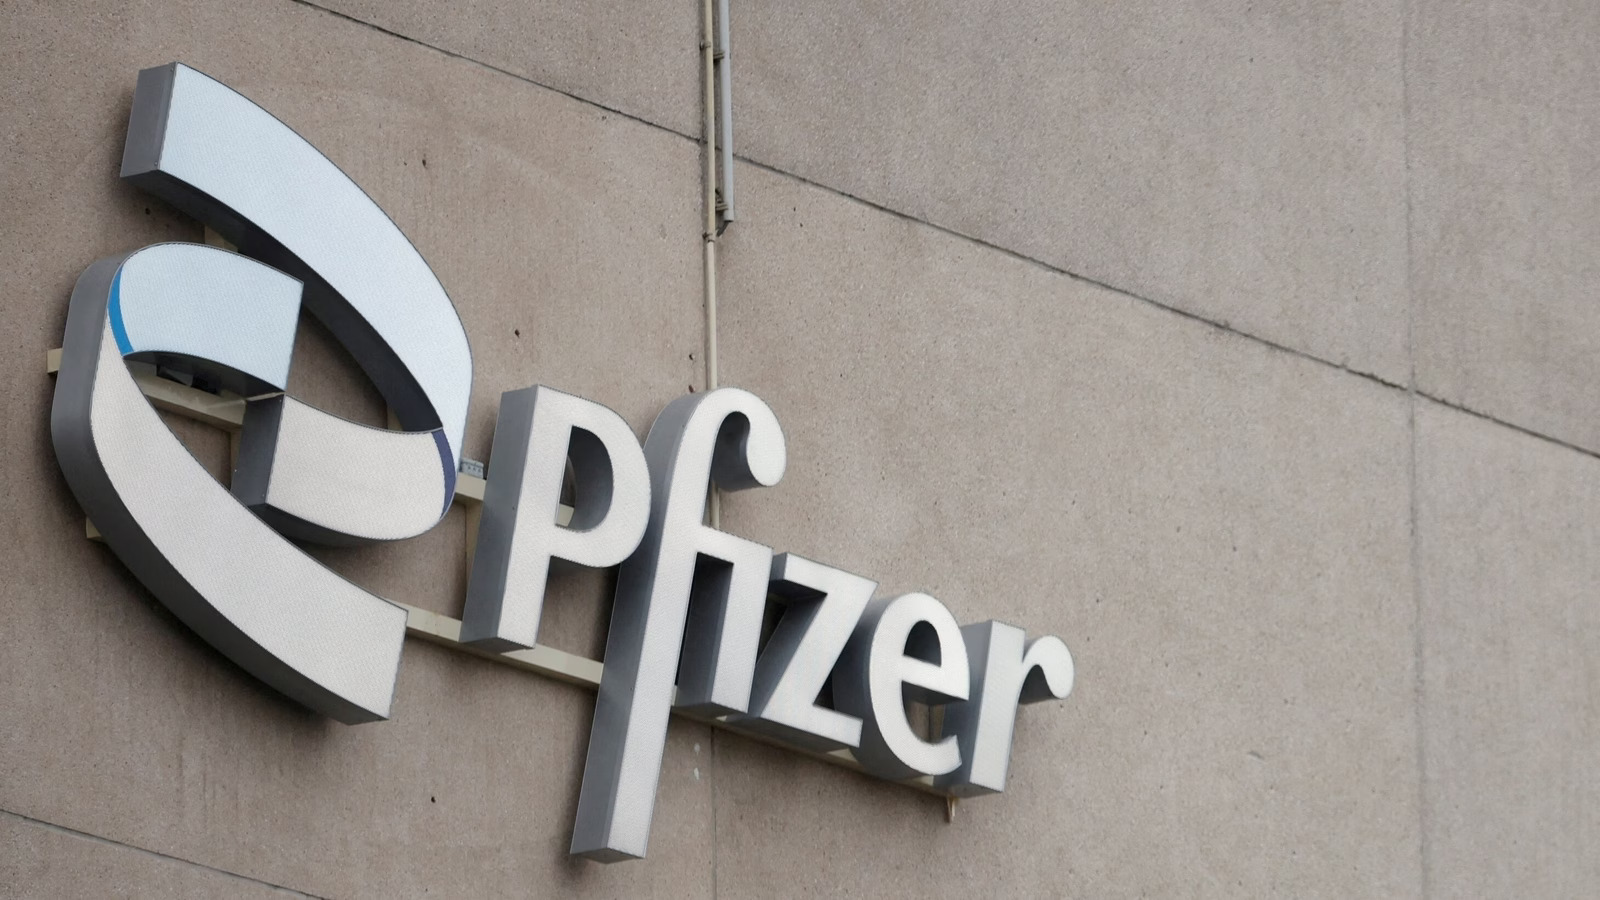 Pfizer’s updated COVID vaccine exhibits effectiveness against new variant in mice study